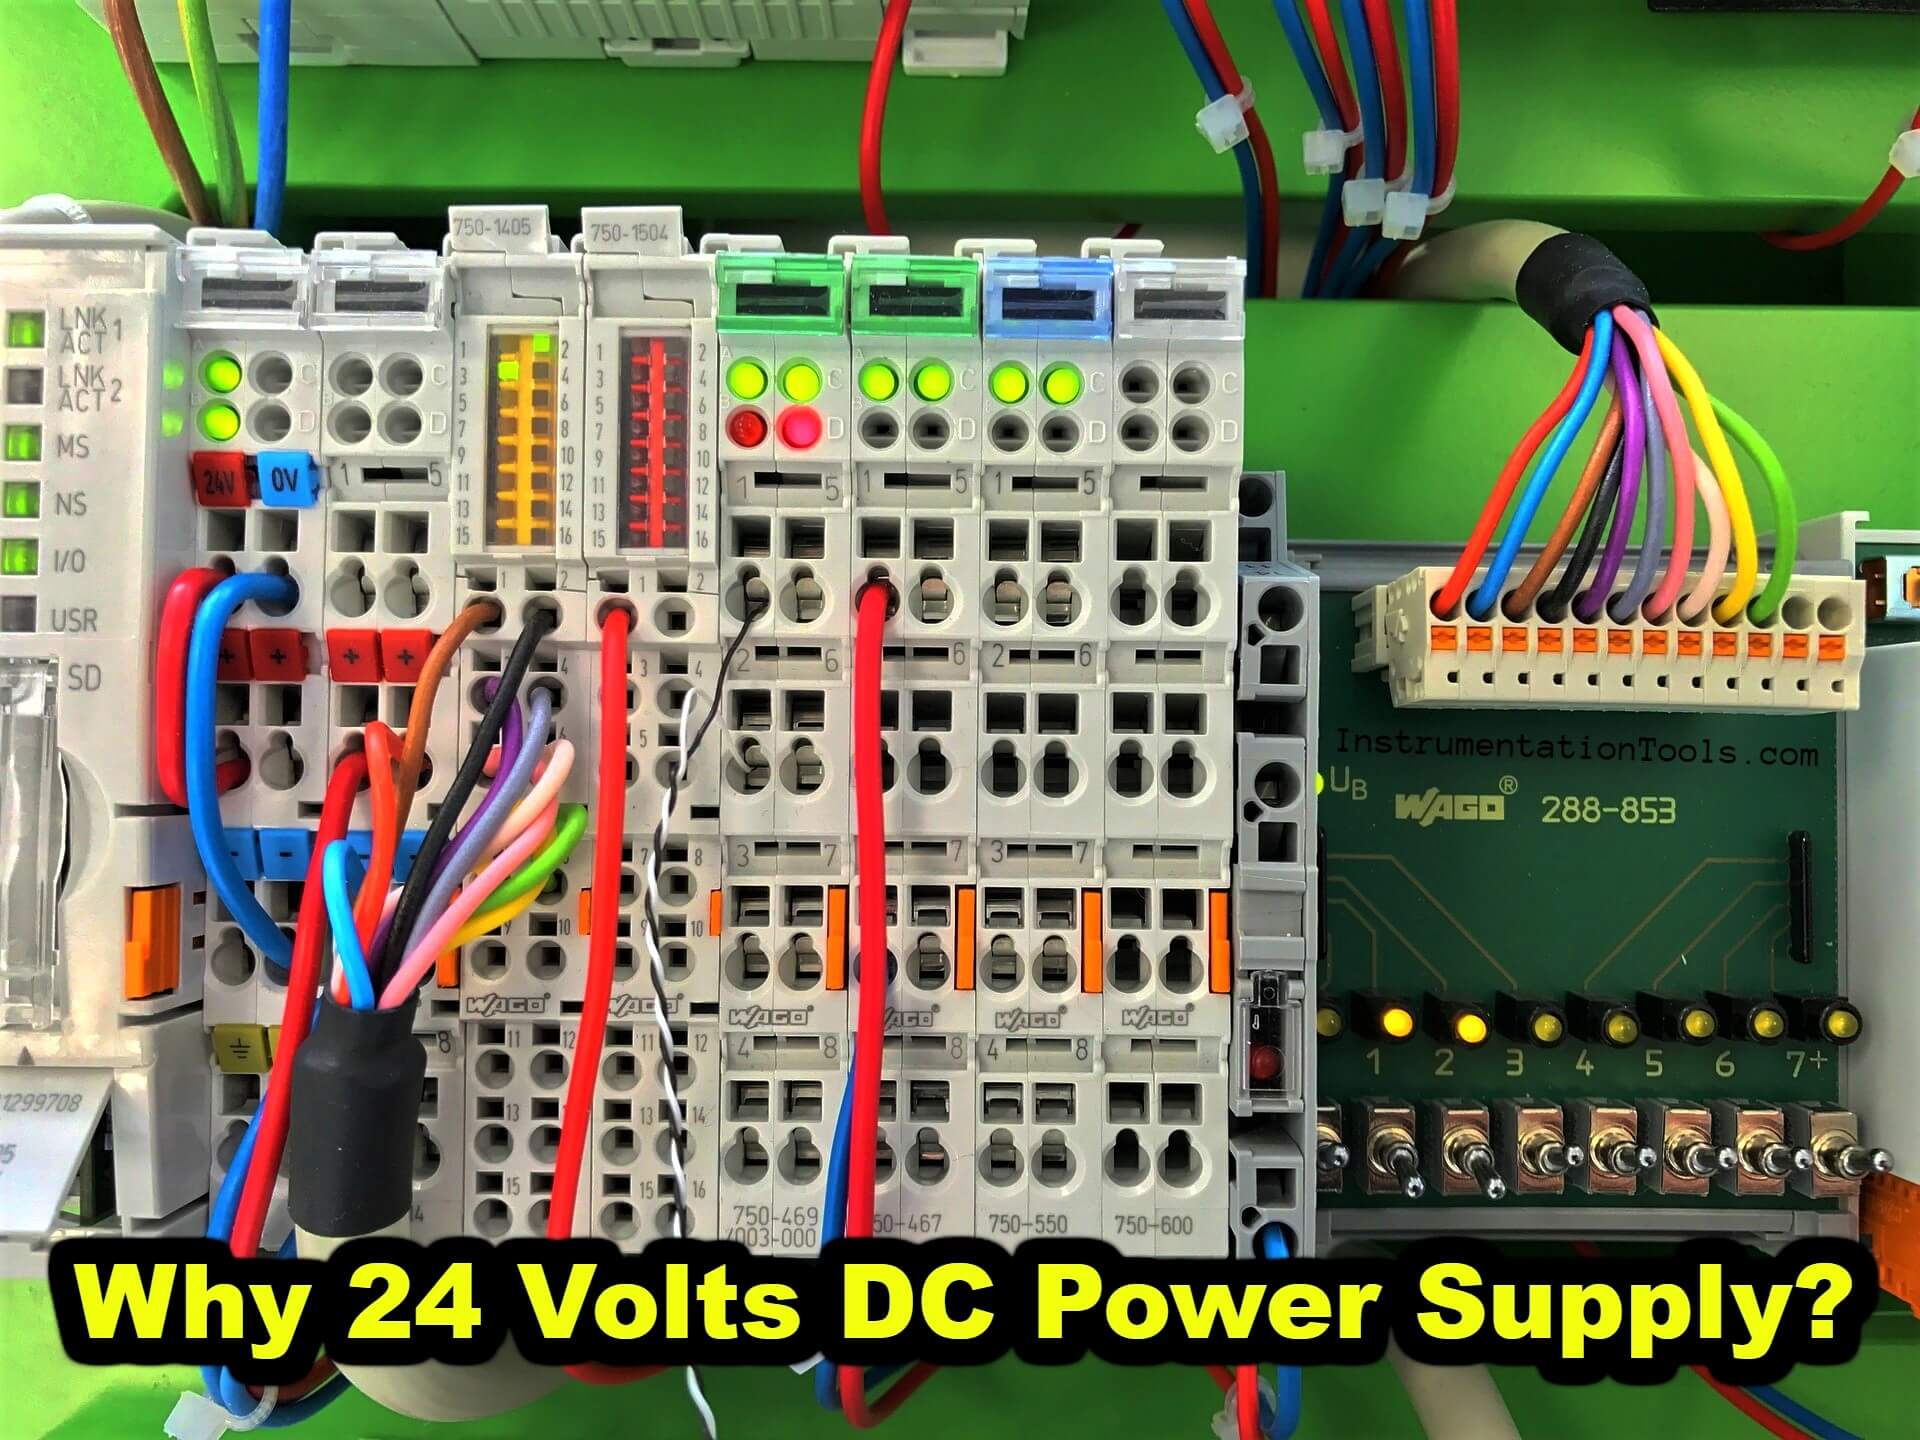 Why 24 Volts DC Power Supply